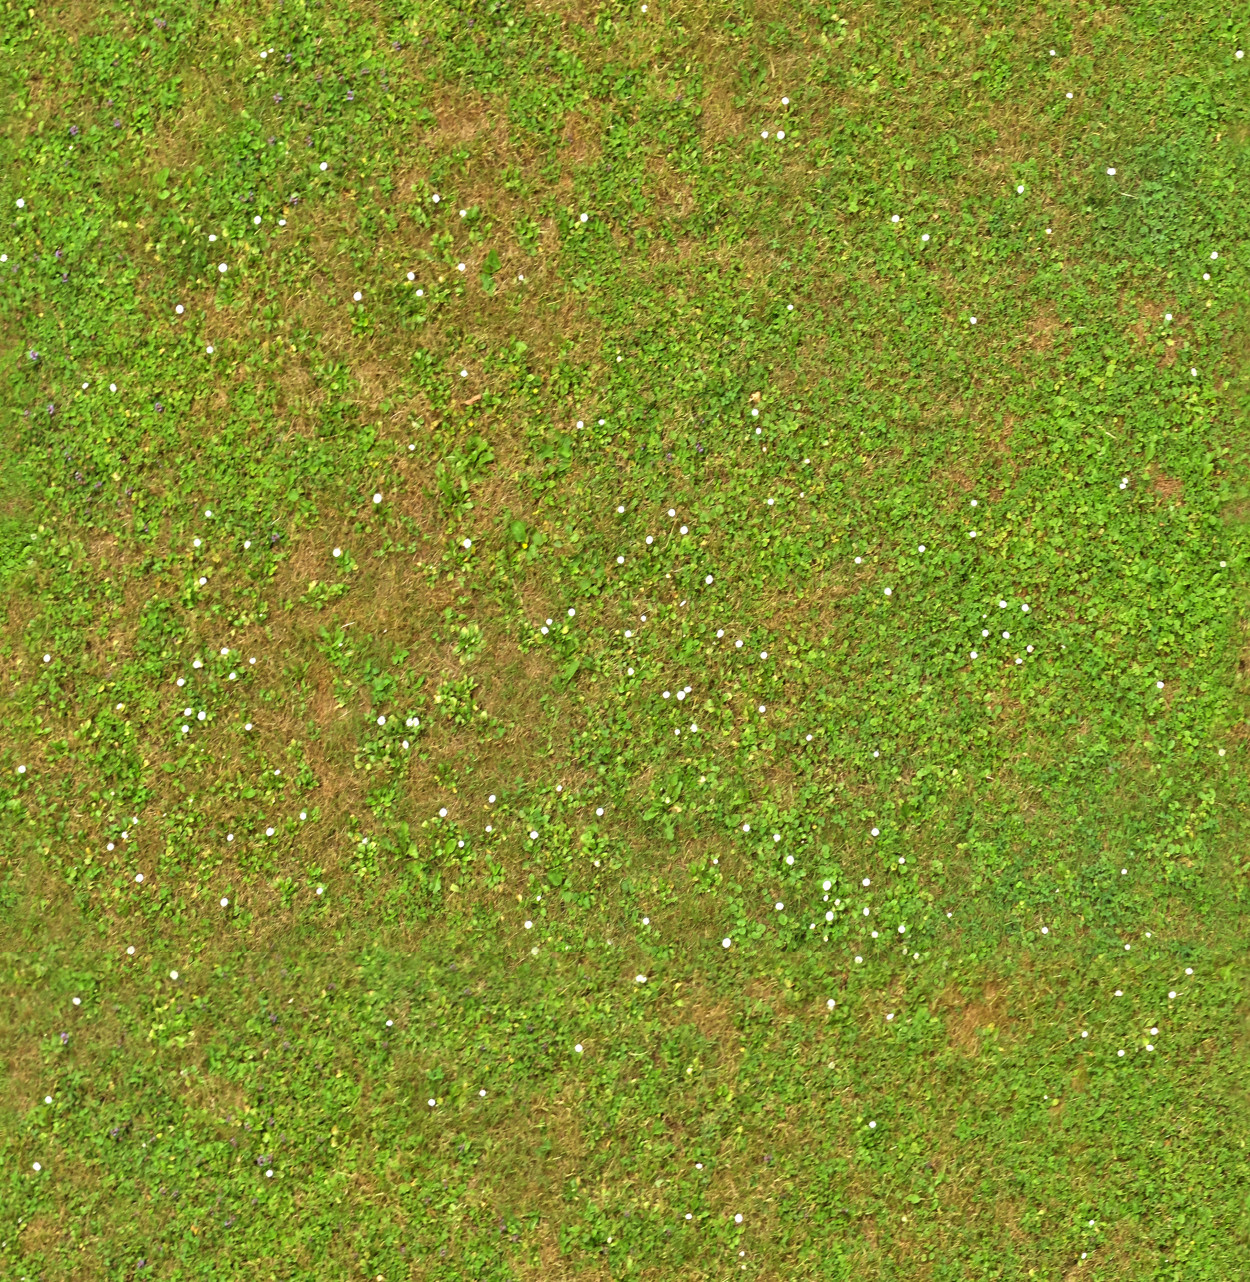 A seamless grass texture for use in architectural drawings and 3D models